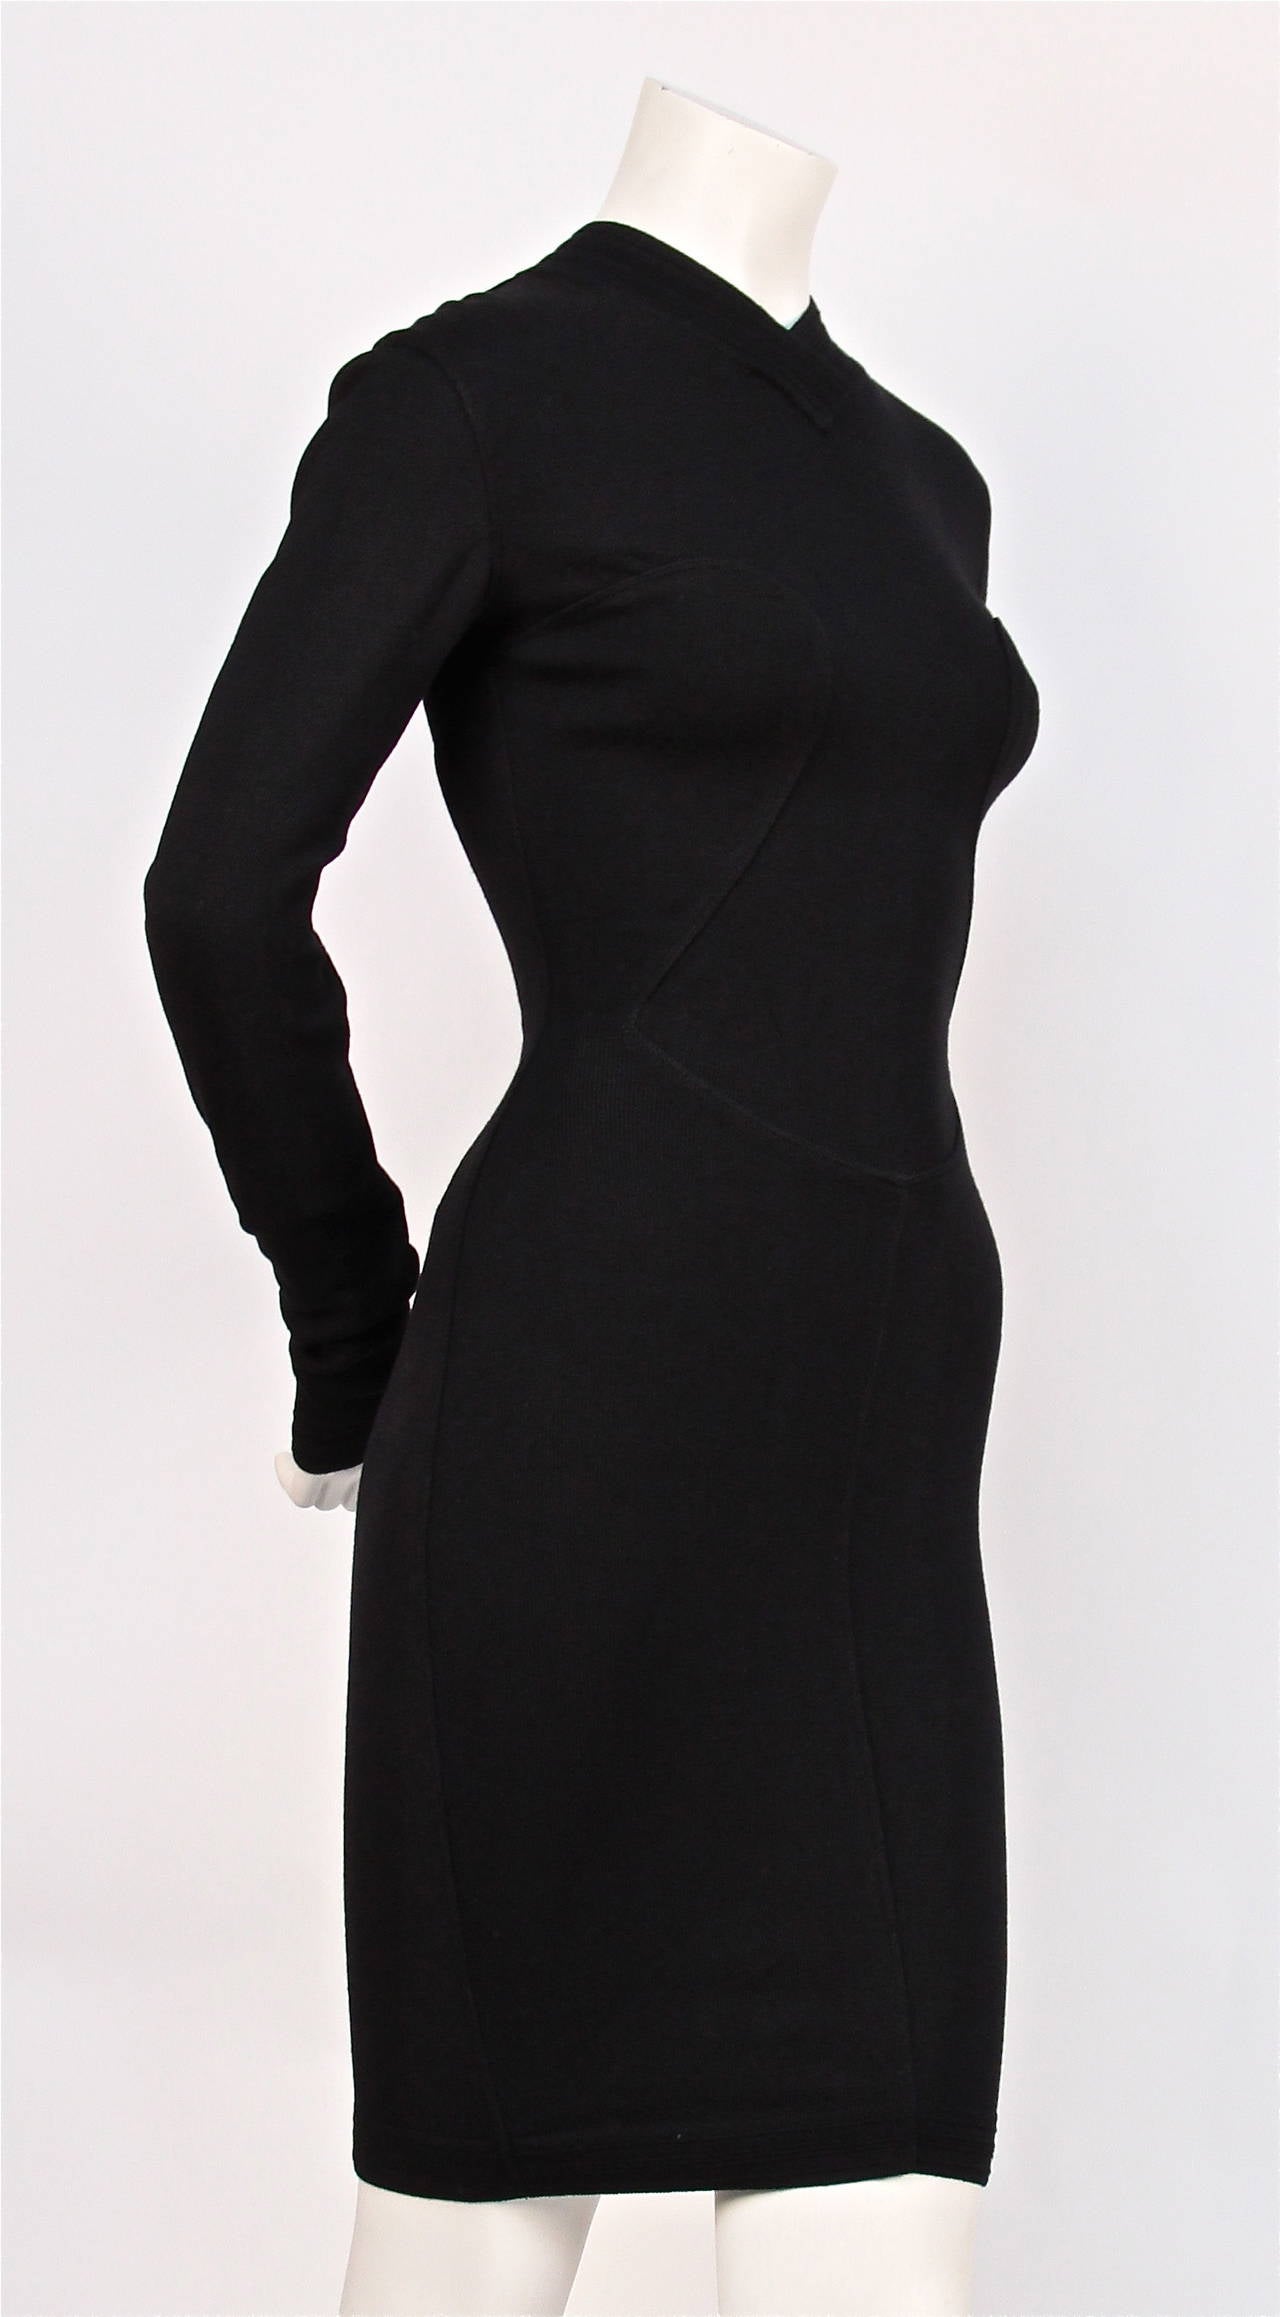 Jet black knit dress with sweetheart seams from Azzedine Alaia dating to the 1990's. Dress is labeled a size 'XS' however it would easily fit a size 'S' as well. Approximate unstretched measurements: 16